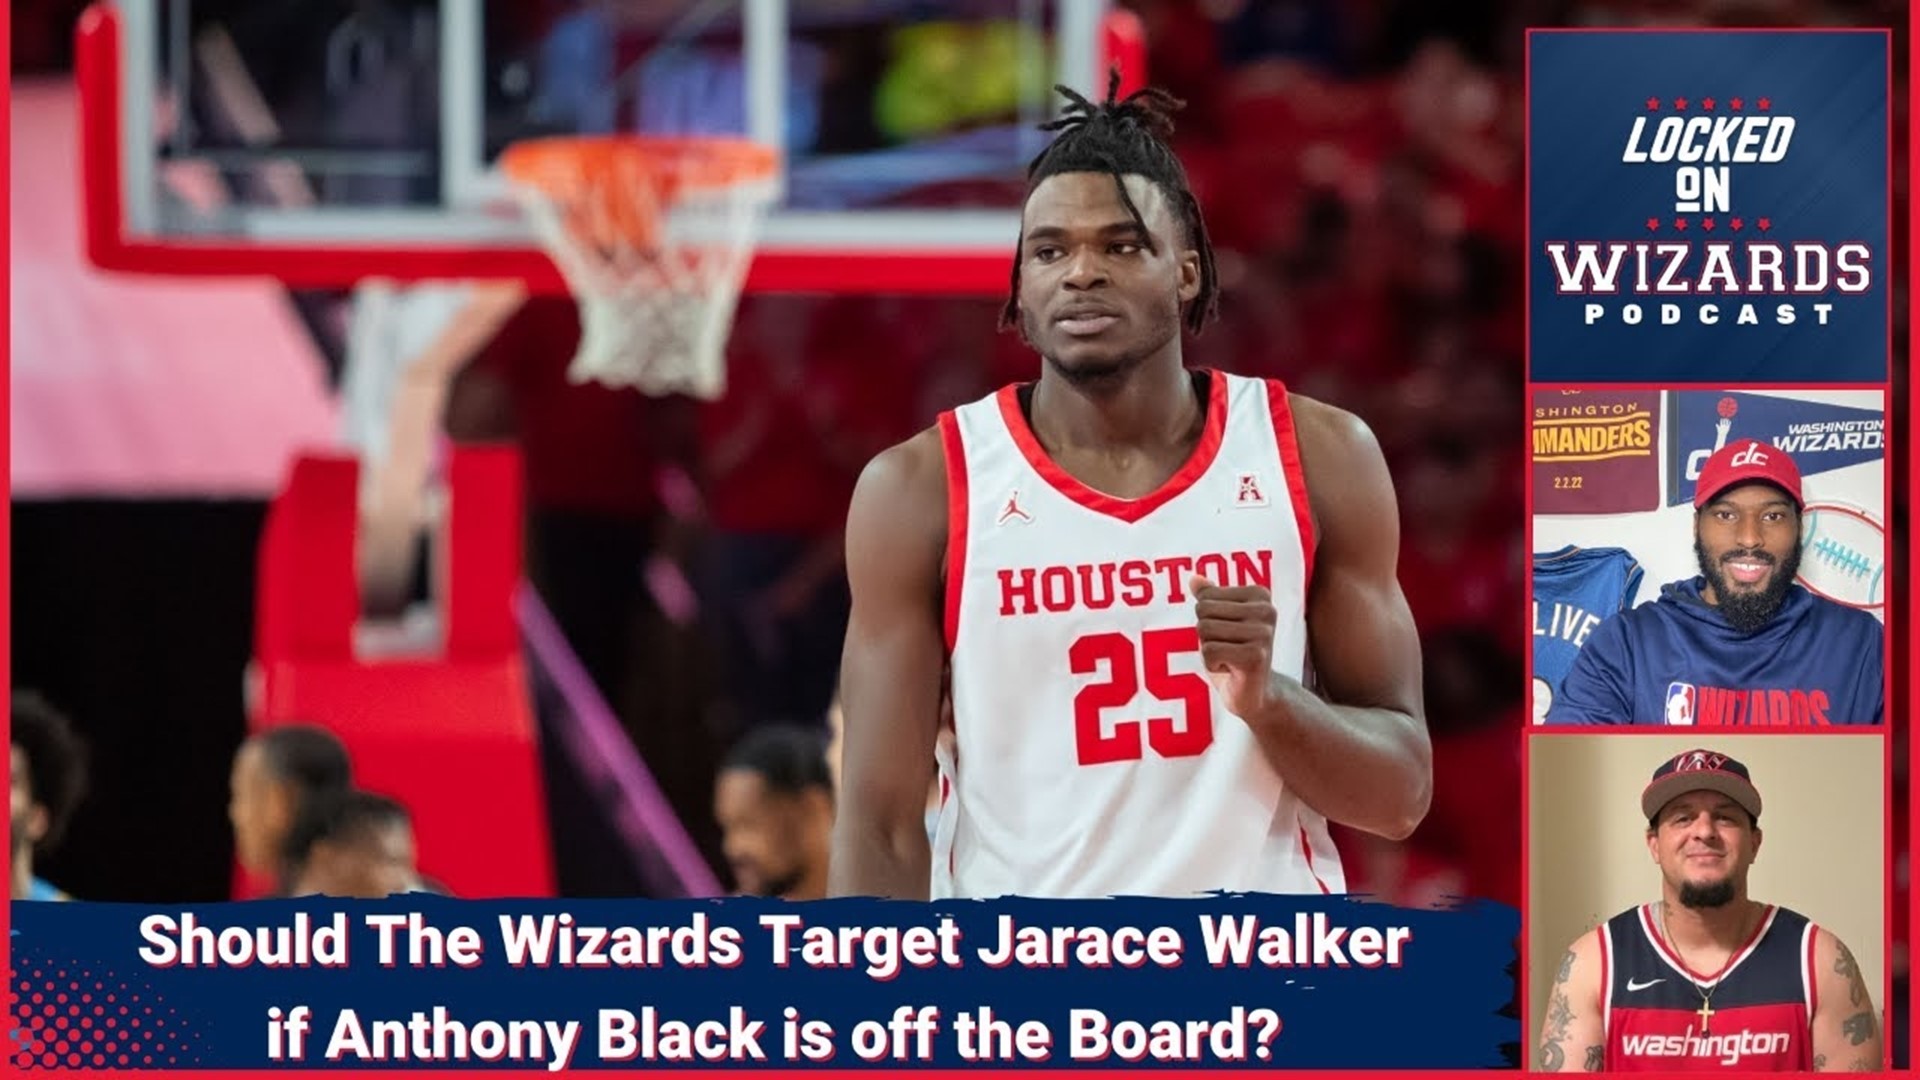 Brandon breaks down the strengths and weaknesses of both Jarace Walker and Dereck Lively.